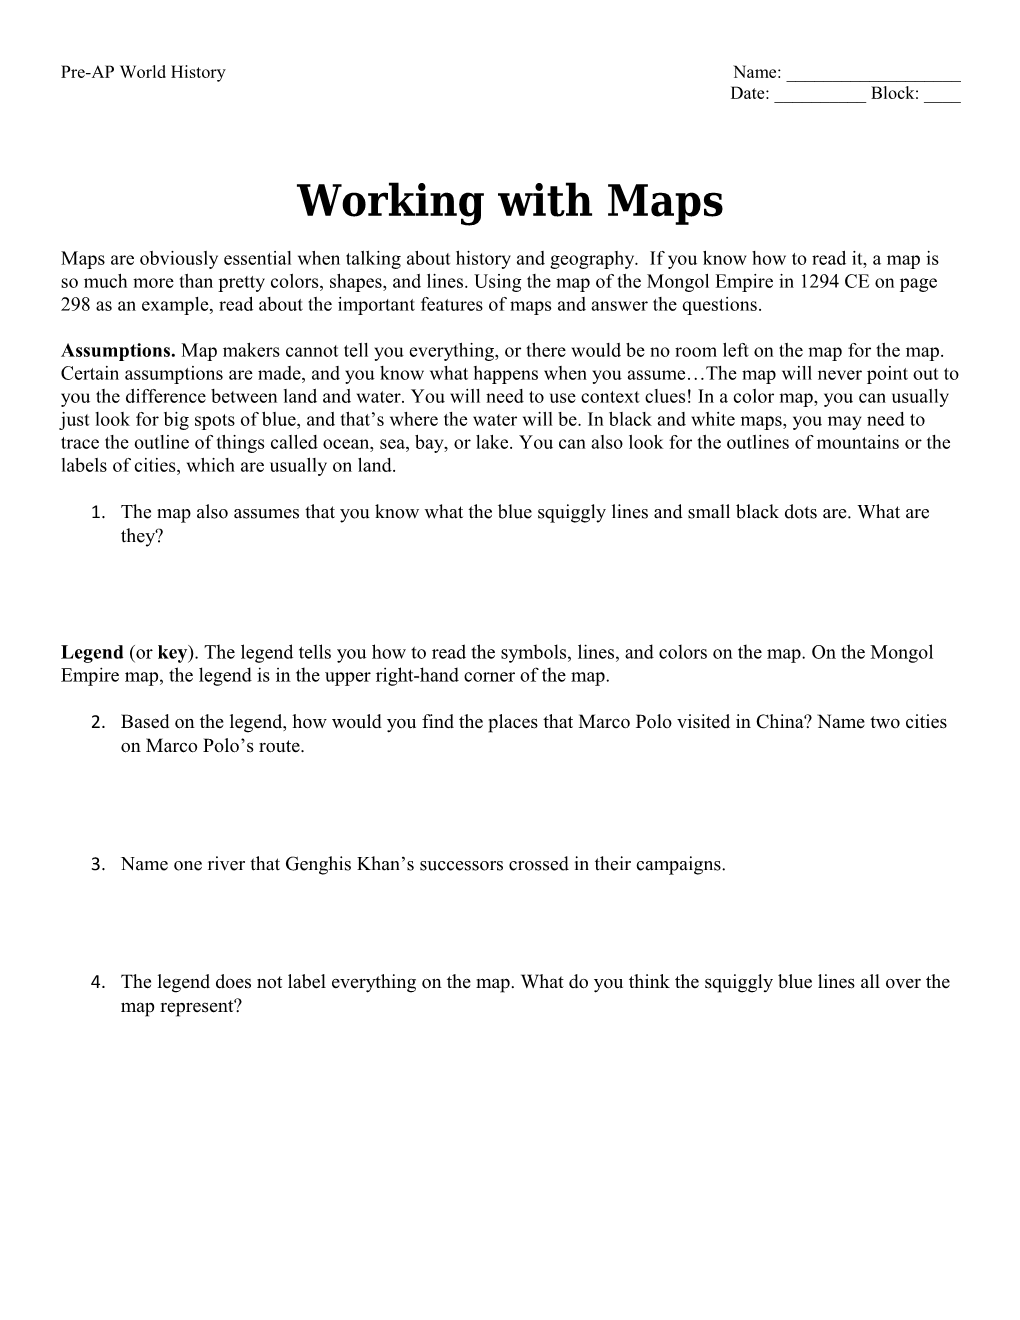 Working with Maps